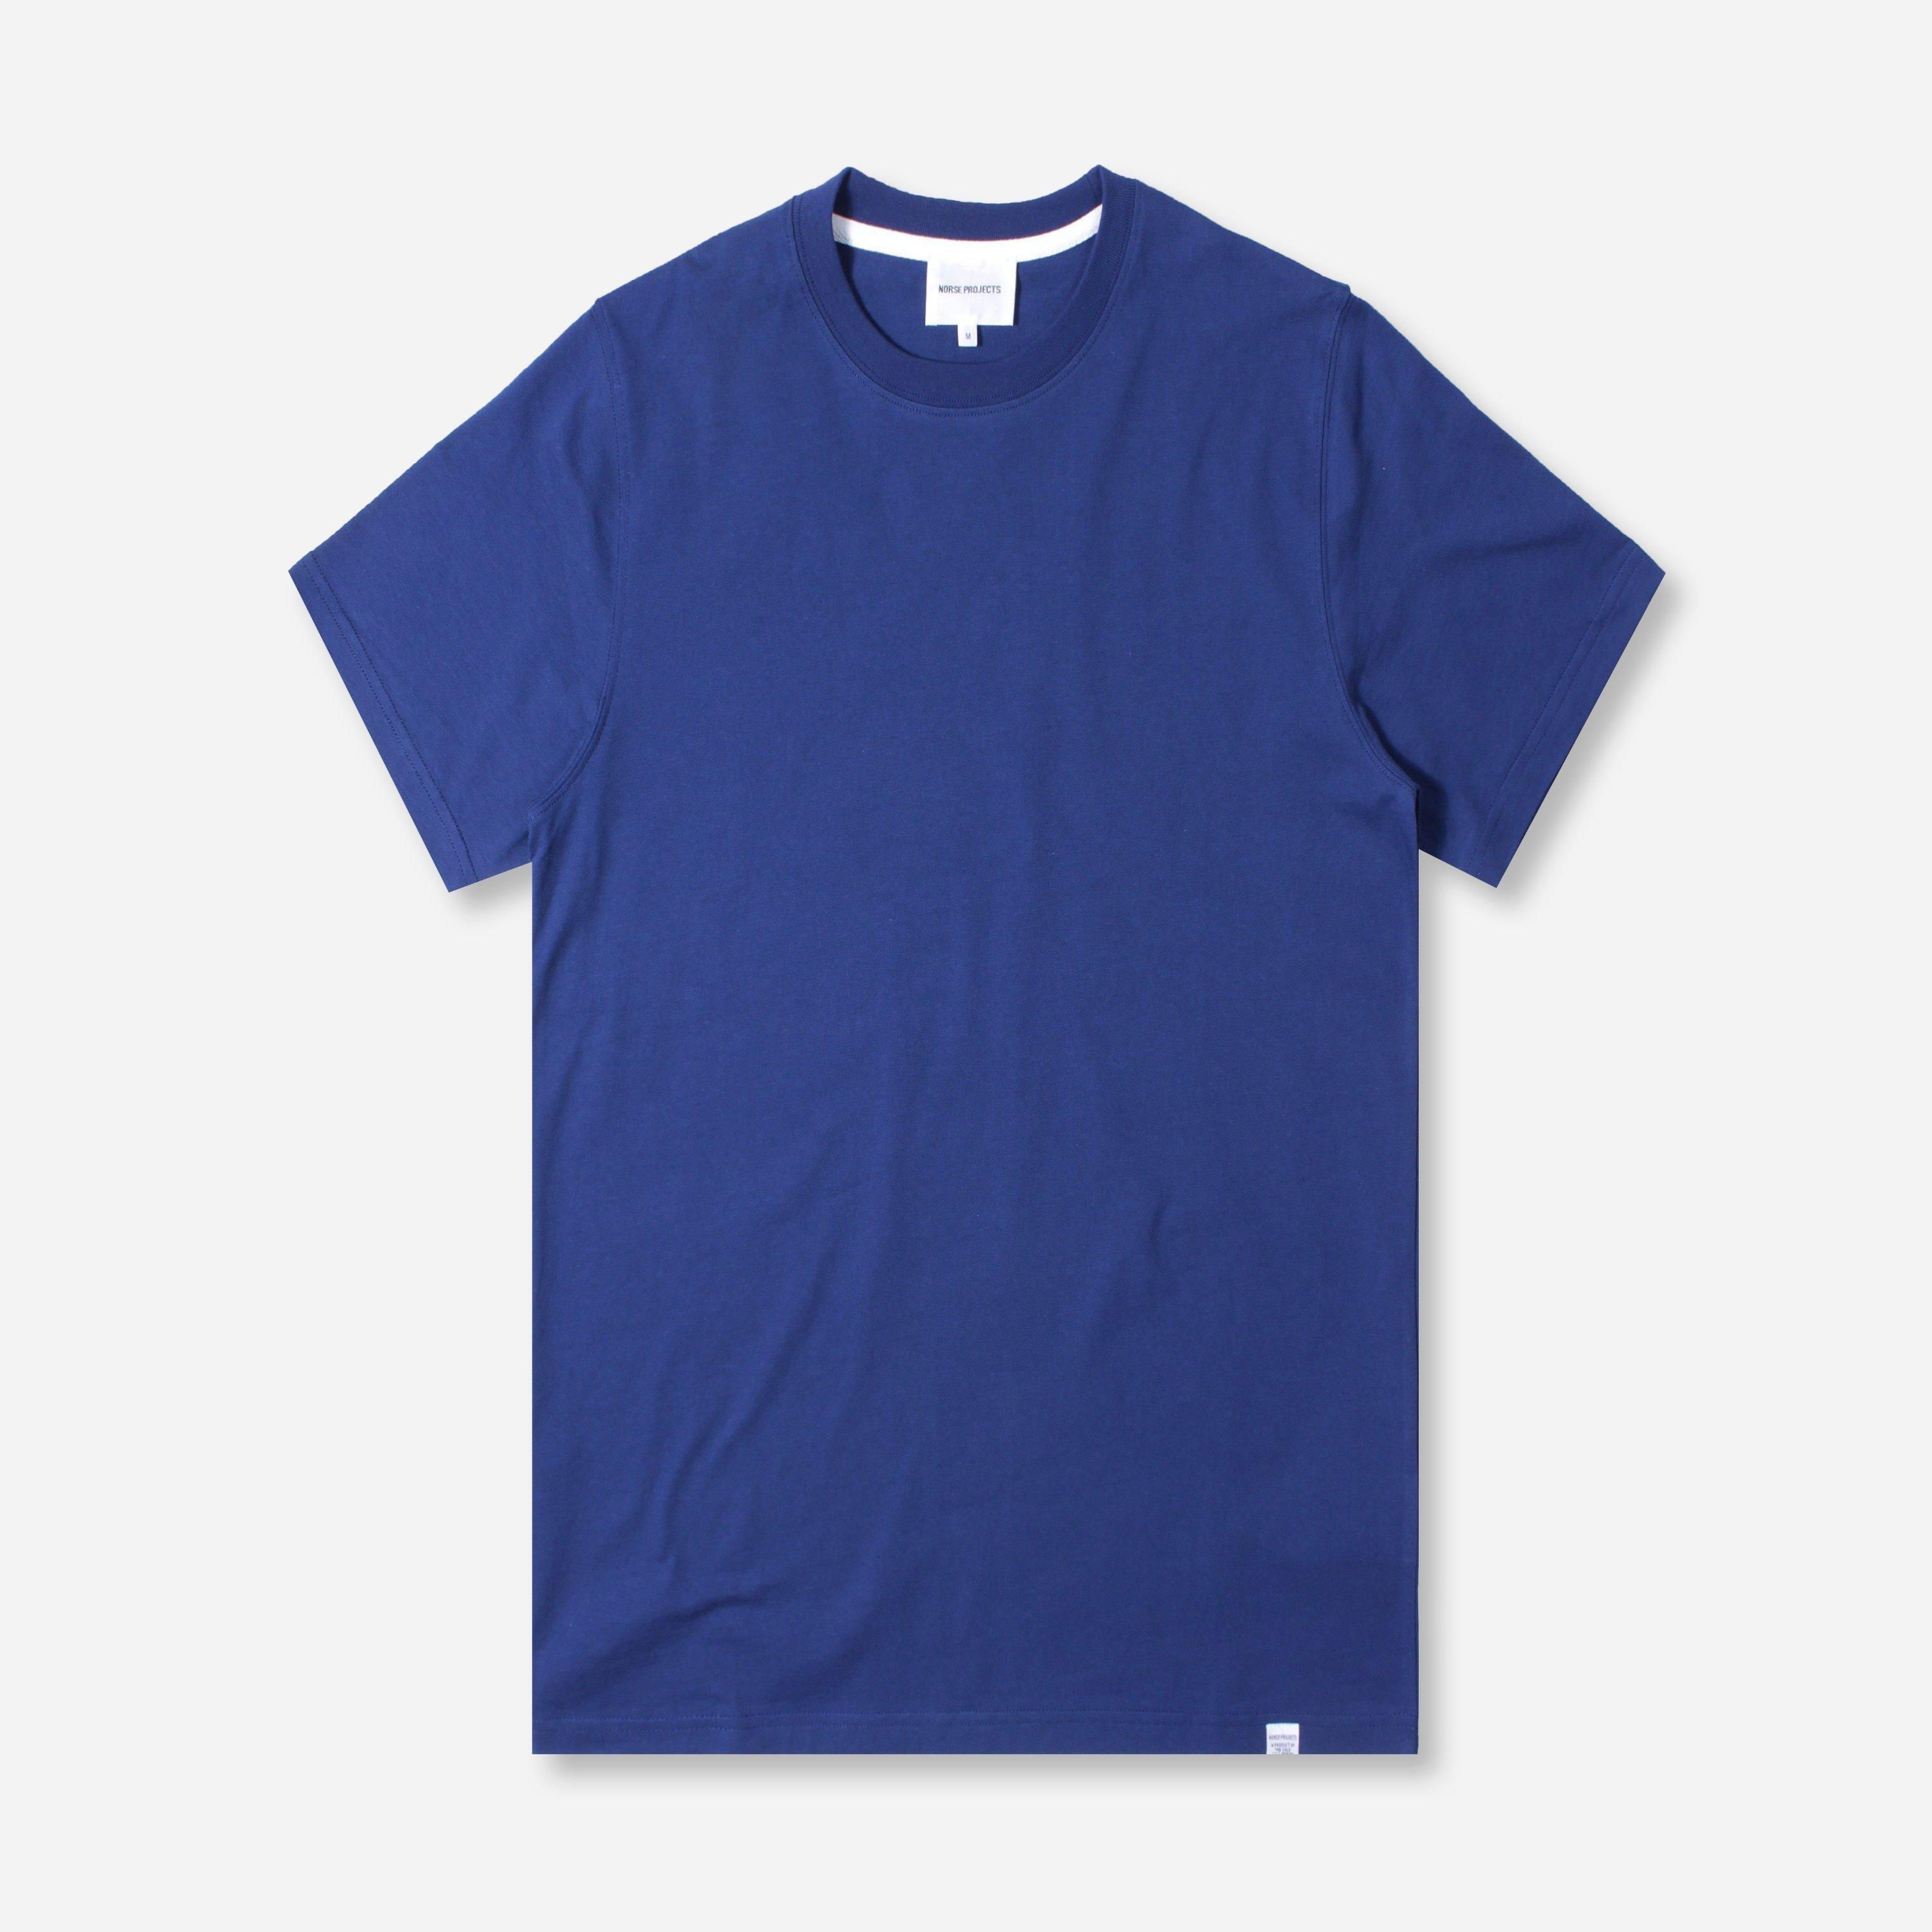 Norse Projects Cotton Niels Standard T-shirt in Blue for Men - Lyst